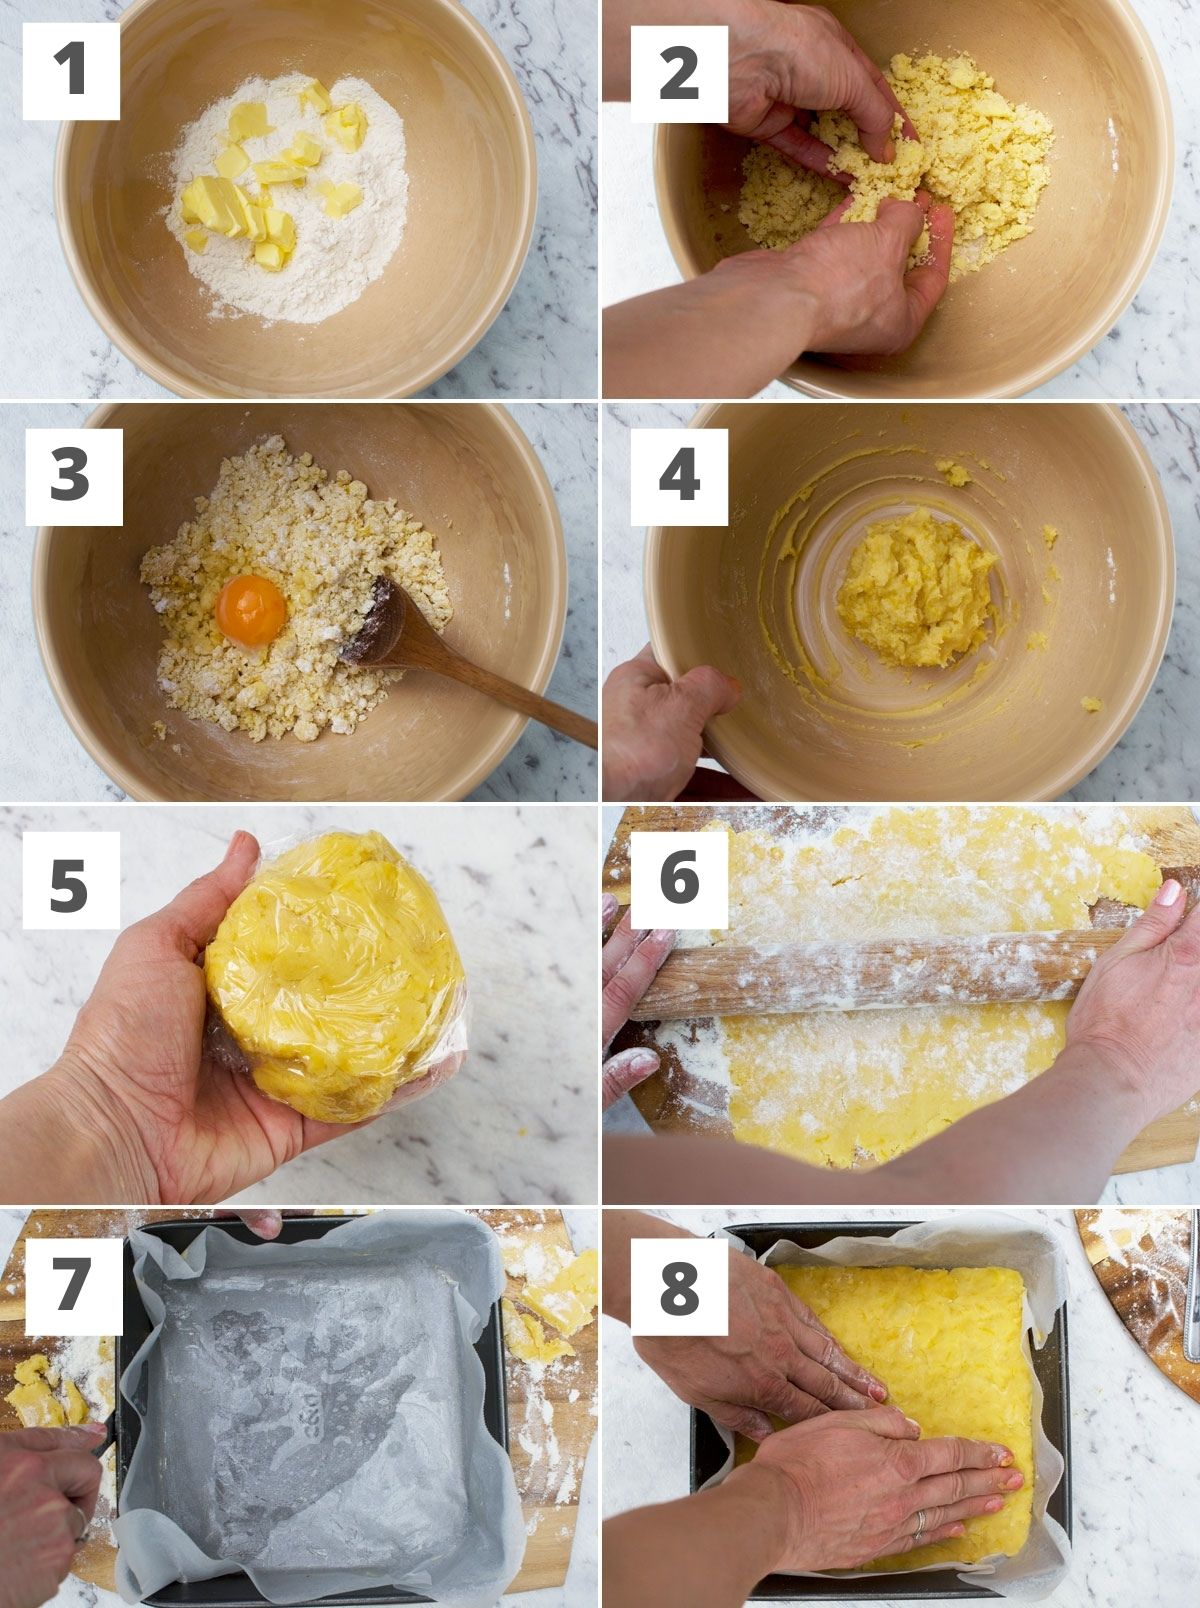 8 process shots showing how to make the pastry for lemon bakewell slices